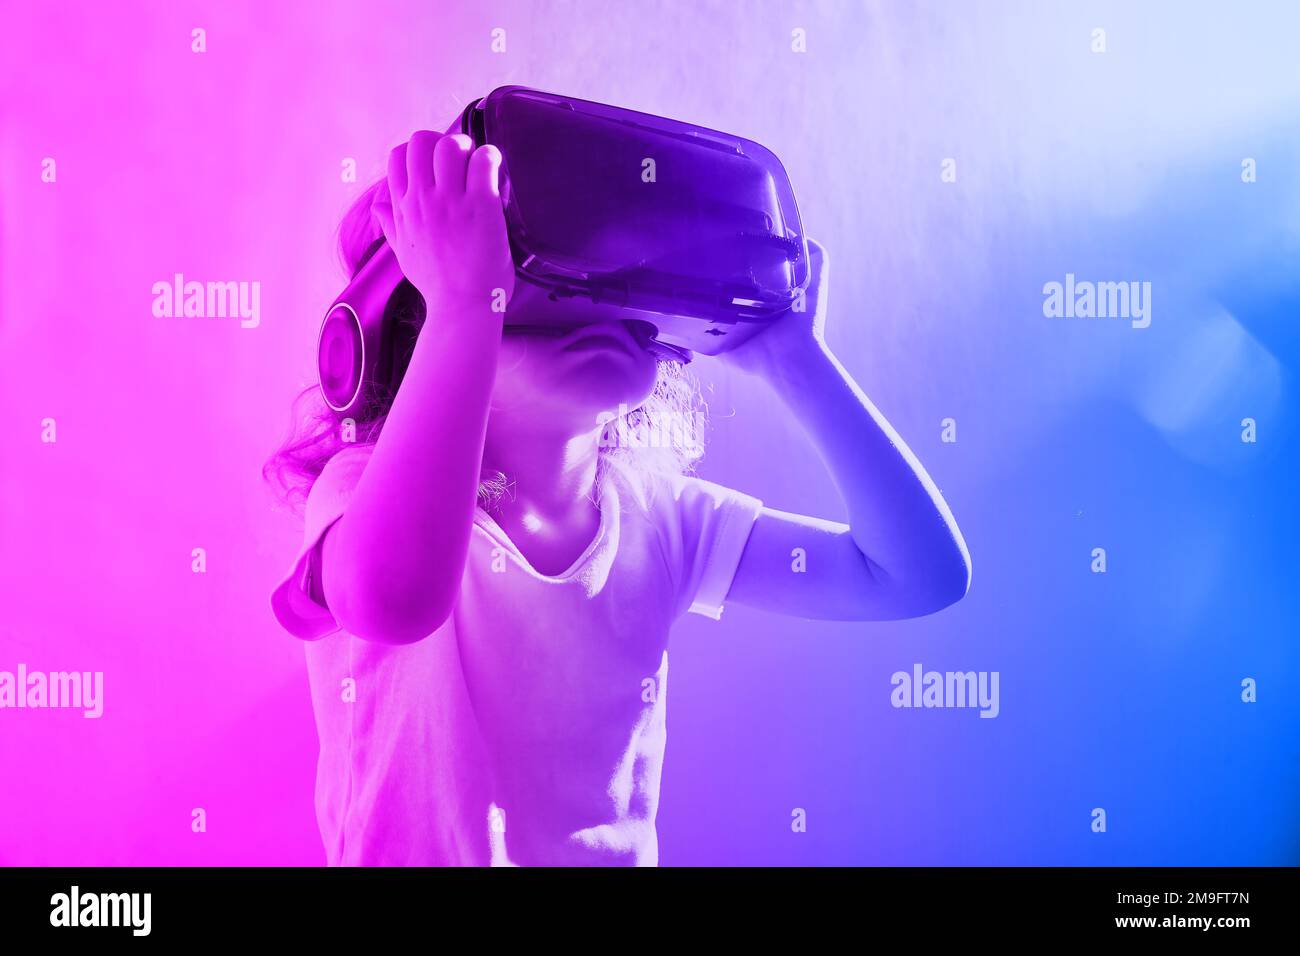 Cute curly-haired girl looks interested in VR glasses. Neon light on the background with copy space Stock Photo